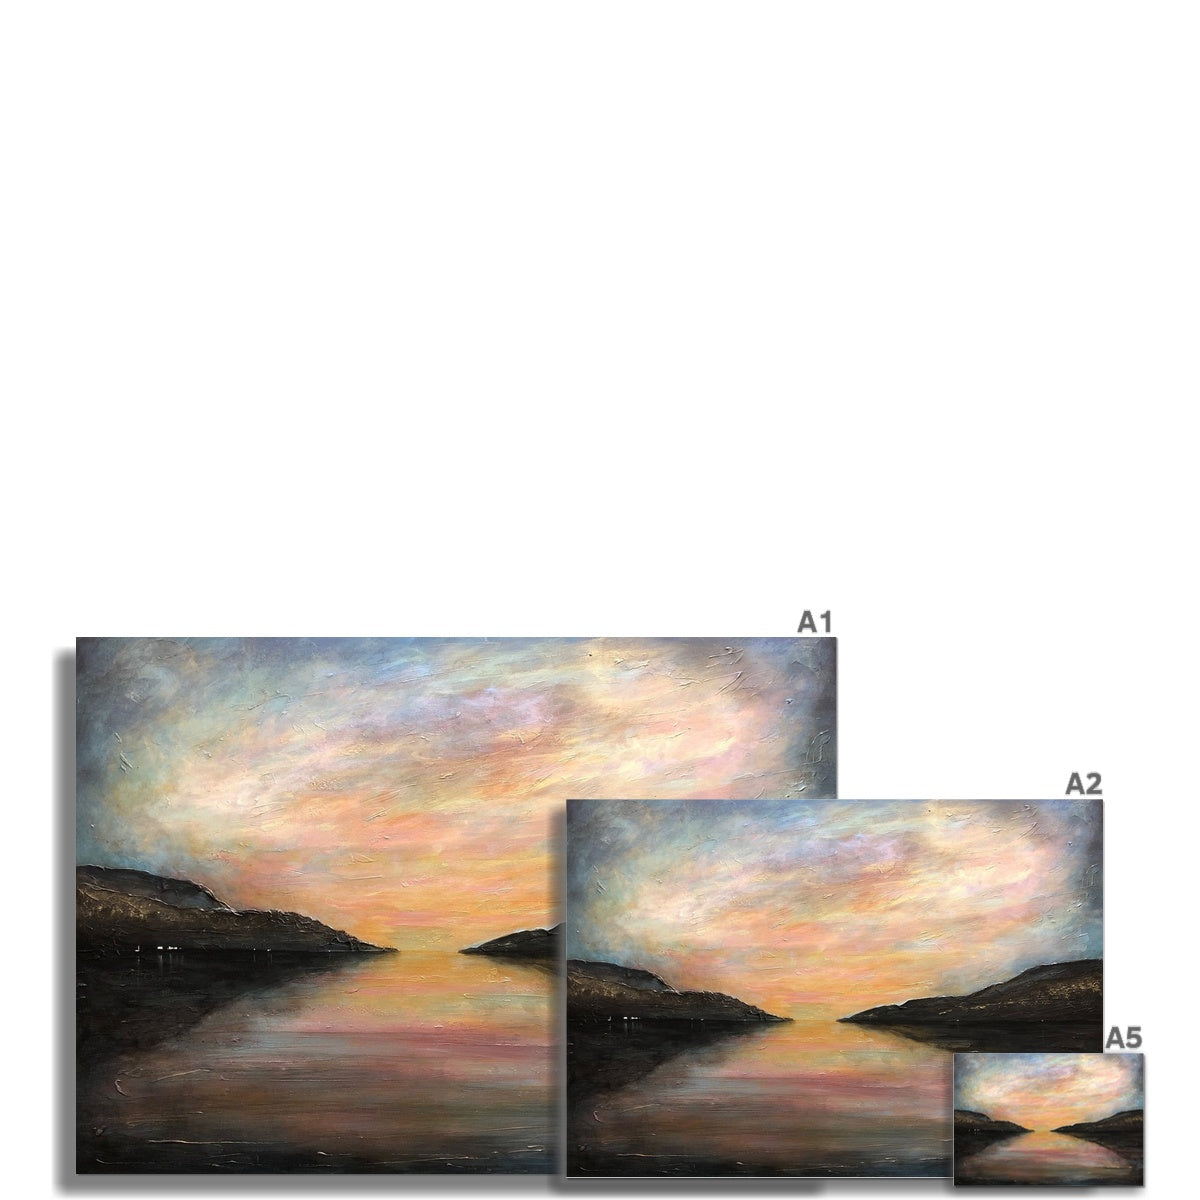 Loch Ness Glow Painting | Fine Art Prints From Scotland-Unframed Prints-Scottish Lochs & Mountains Art Gallery-Paintings, Prints, Homeware, Art Gifts From Scotland By Scottish Artist Kevin Hunter